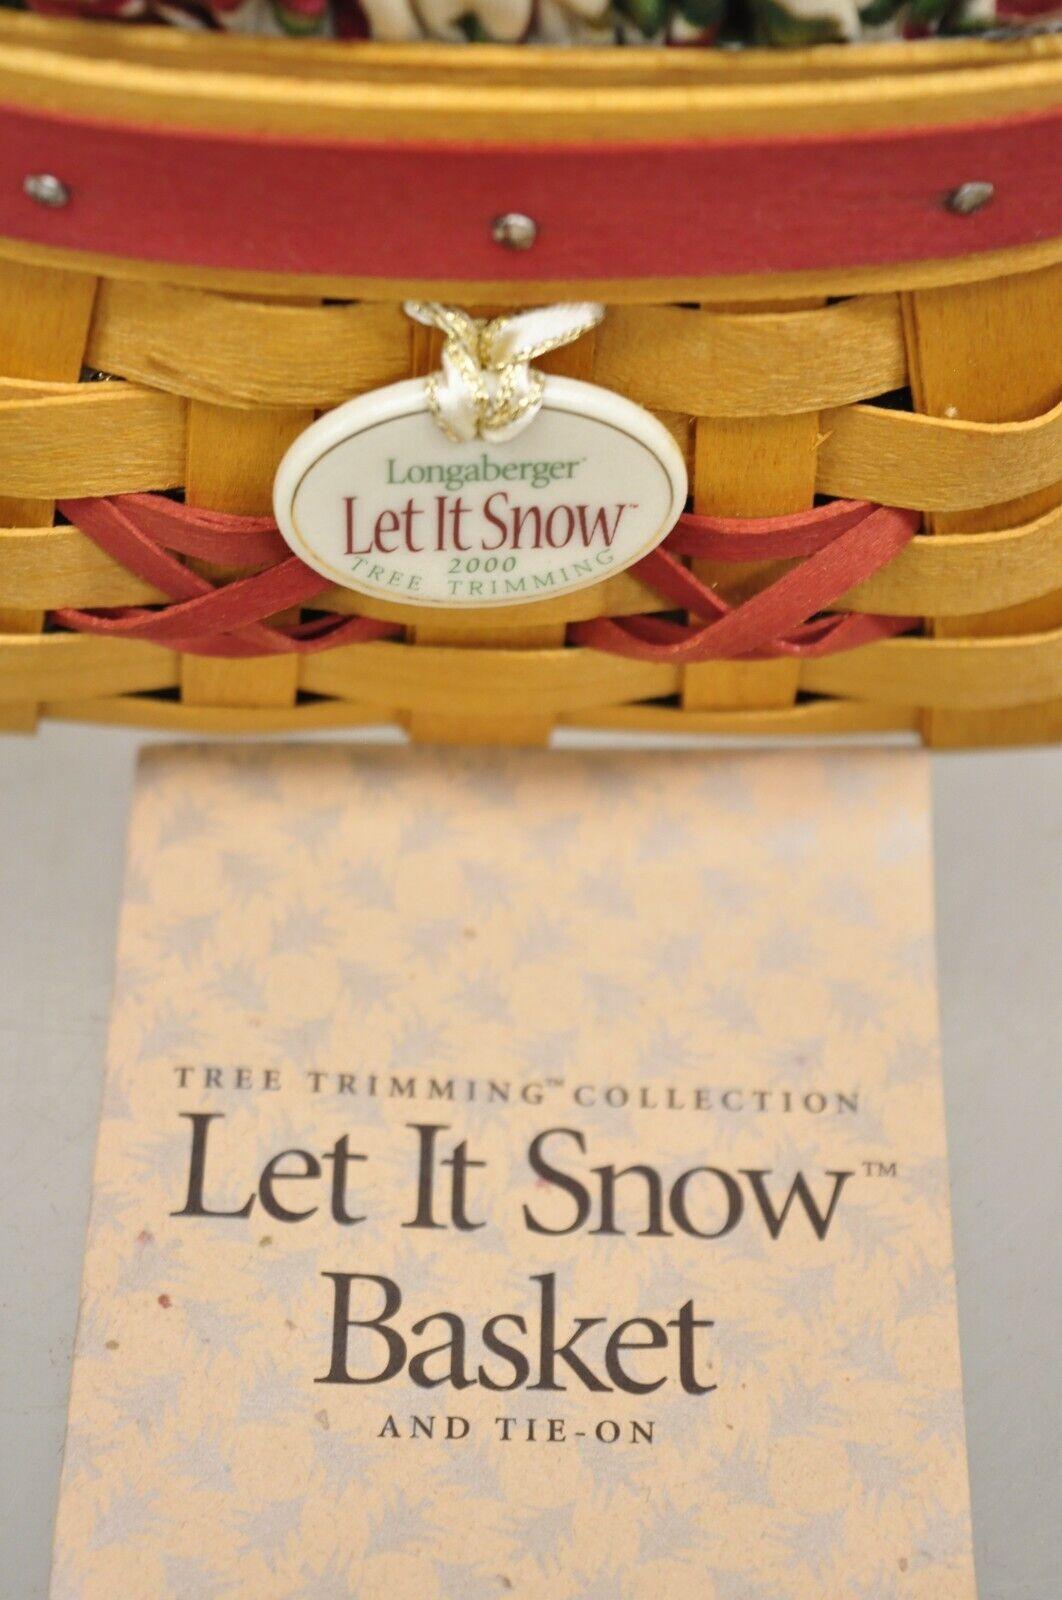 Wood Longaberger 2000 Red Tree Trimming Let it Snow Basket with Protector Lid & Card For Sale